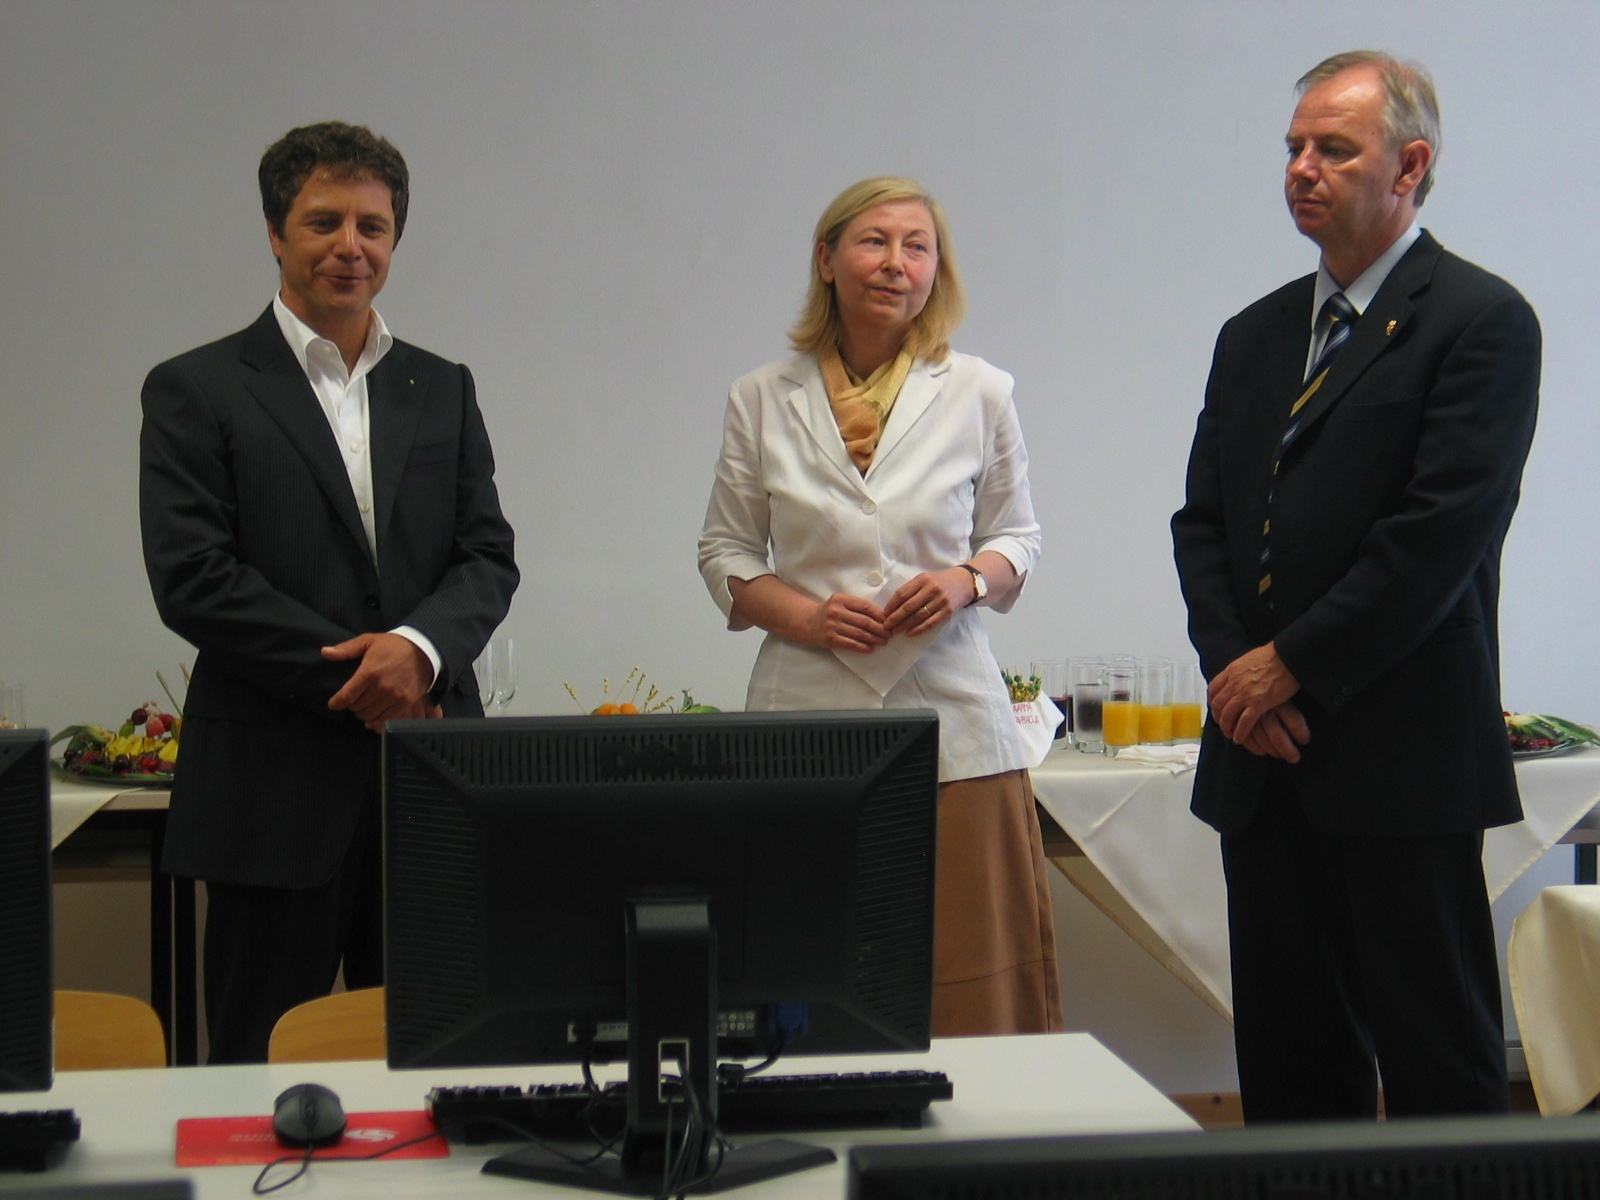 Donation given to the University of Nova Gorica by Business Solutions